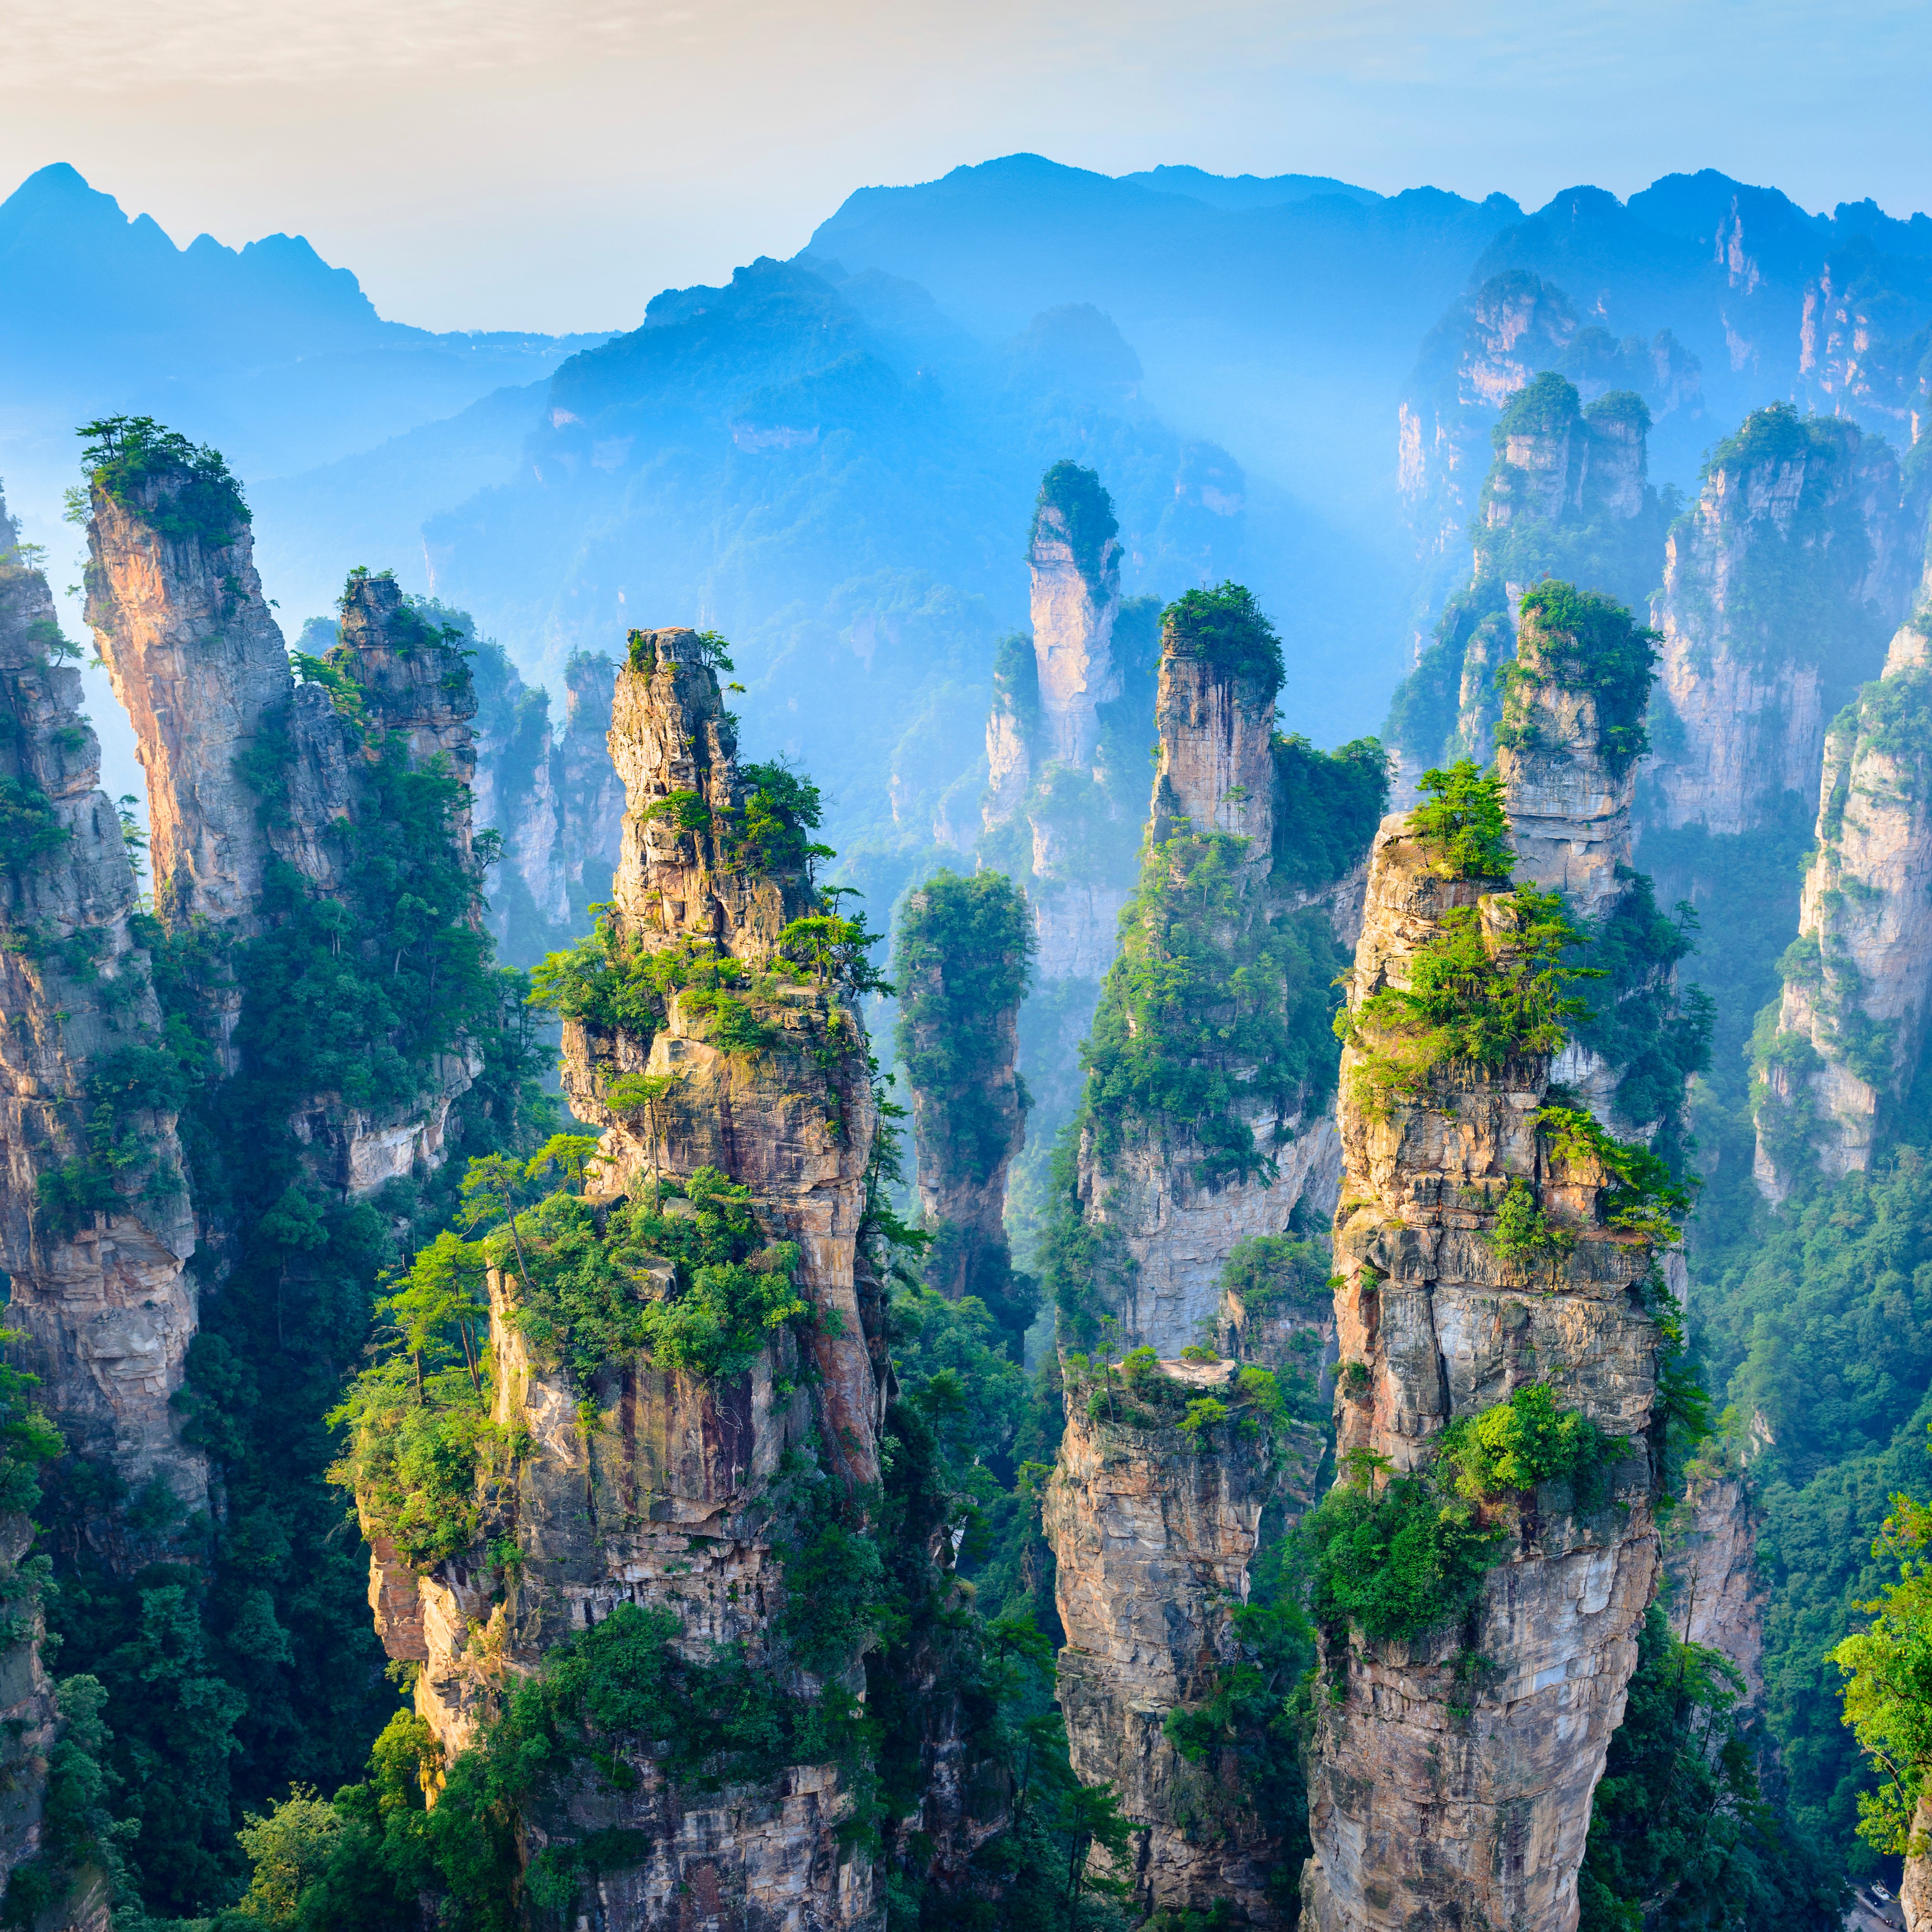 image of intersting geological formations in Zhangjiajie National Forest Park, China